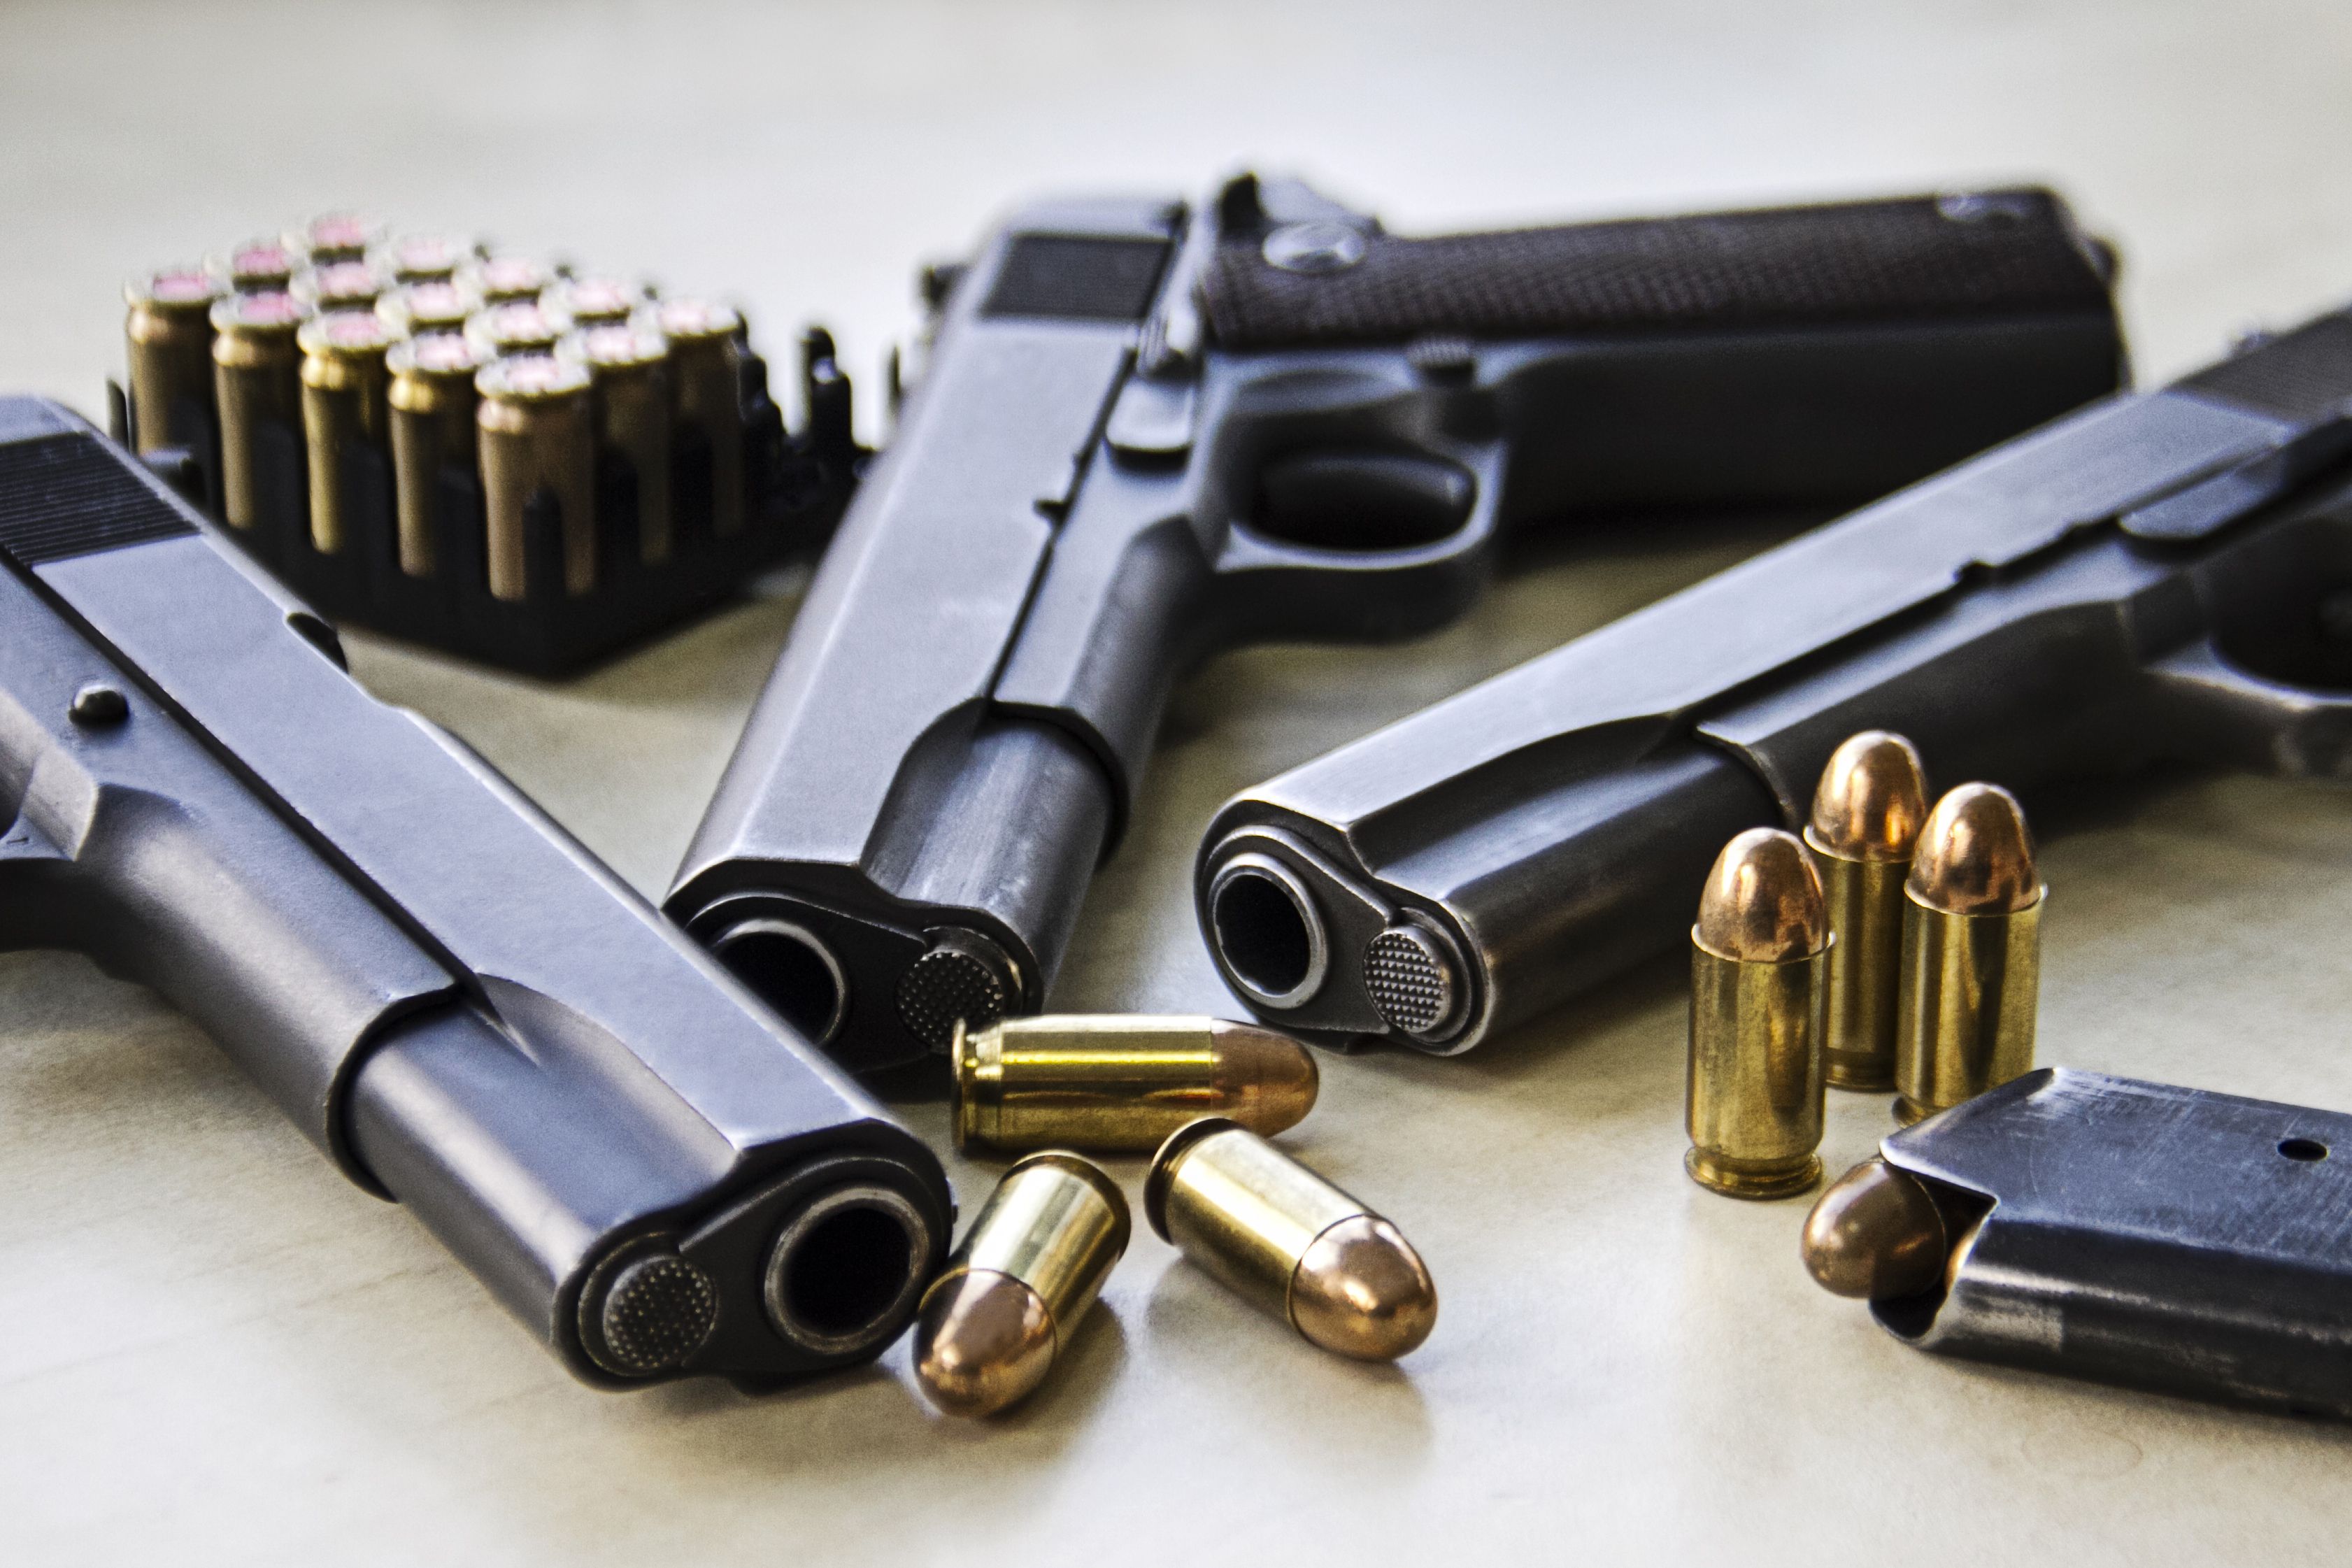 <p>Gun ownership is a hot topic. No doubt you’ve got your own opinions on whether gun ownership should be restricted or not.</p><p>However, gun control is not the subject of this post. Instead, you’ll learn about the best guns to collect for investment.</p><p>Well-made guns that have been looked after can retain their value. If the collectible gun has historical value, it often increases in value even more. This means that investing in guns can be worthwhile. </p><p>In this post, you will learn about all the different ways to <a href="https://www.lifeupswing.com/how-to-become-rich-overnight/">build wealth</a> by investing in guns.</p>